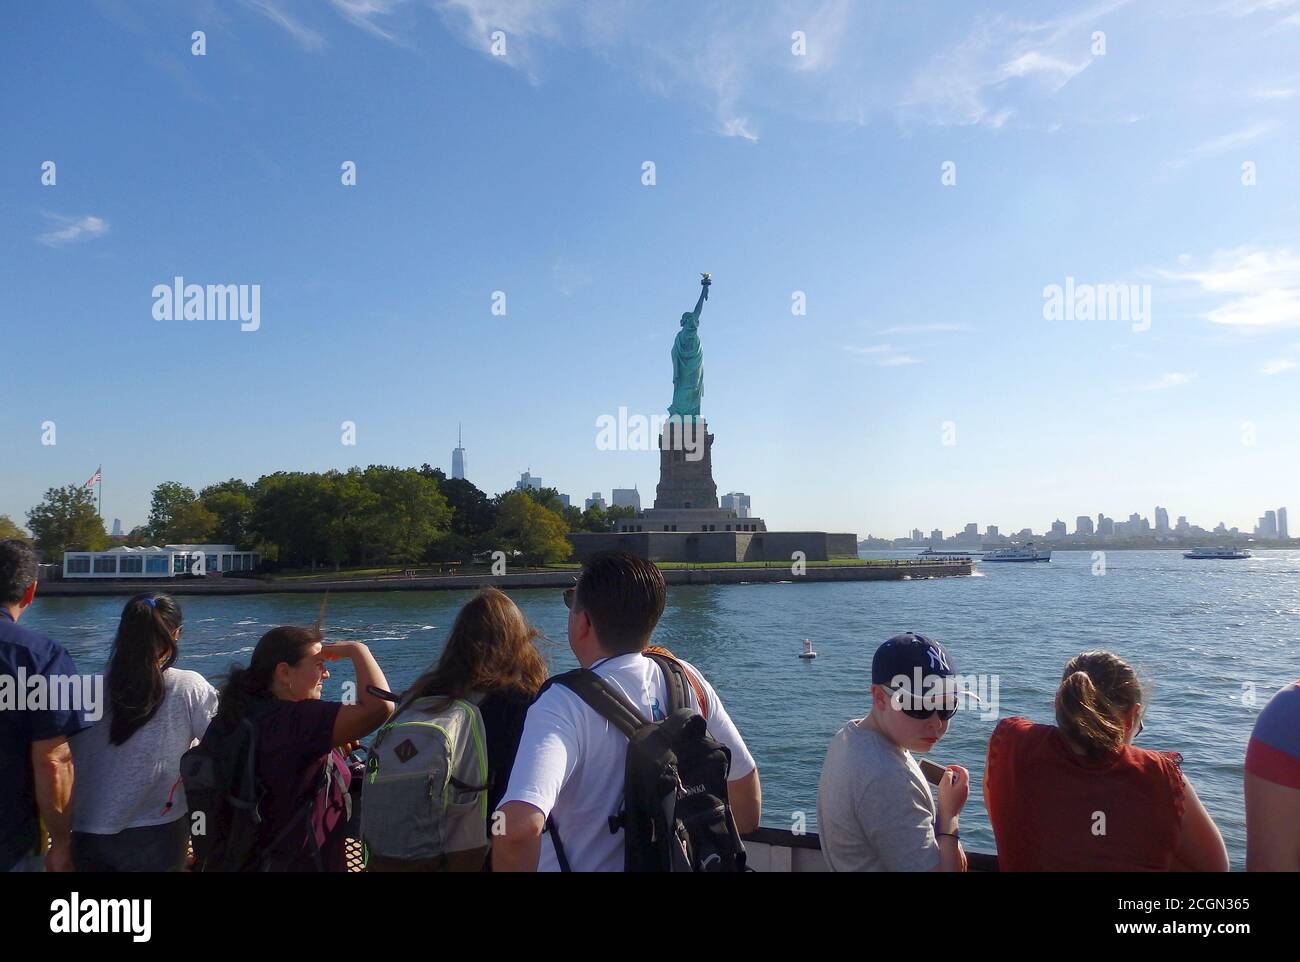 The Statue of Liberty National Monument from a boat in New York Harbor, New York City, United States Stock Photo